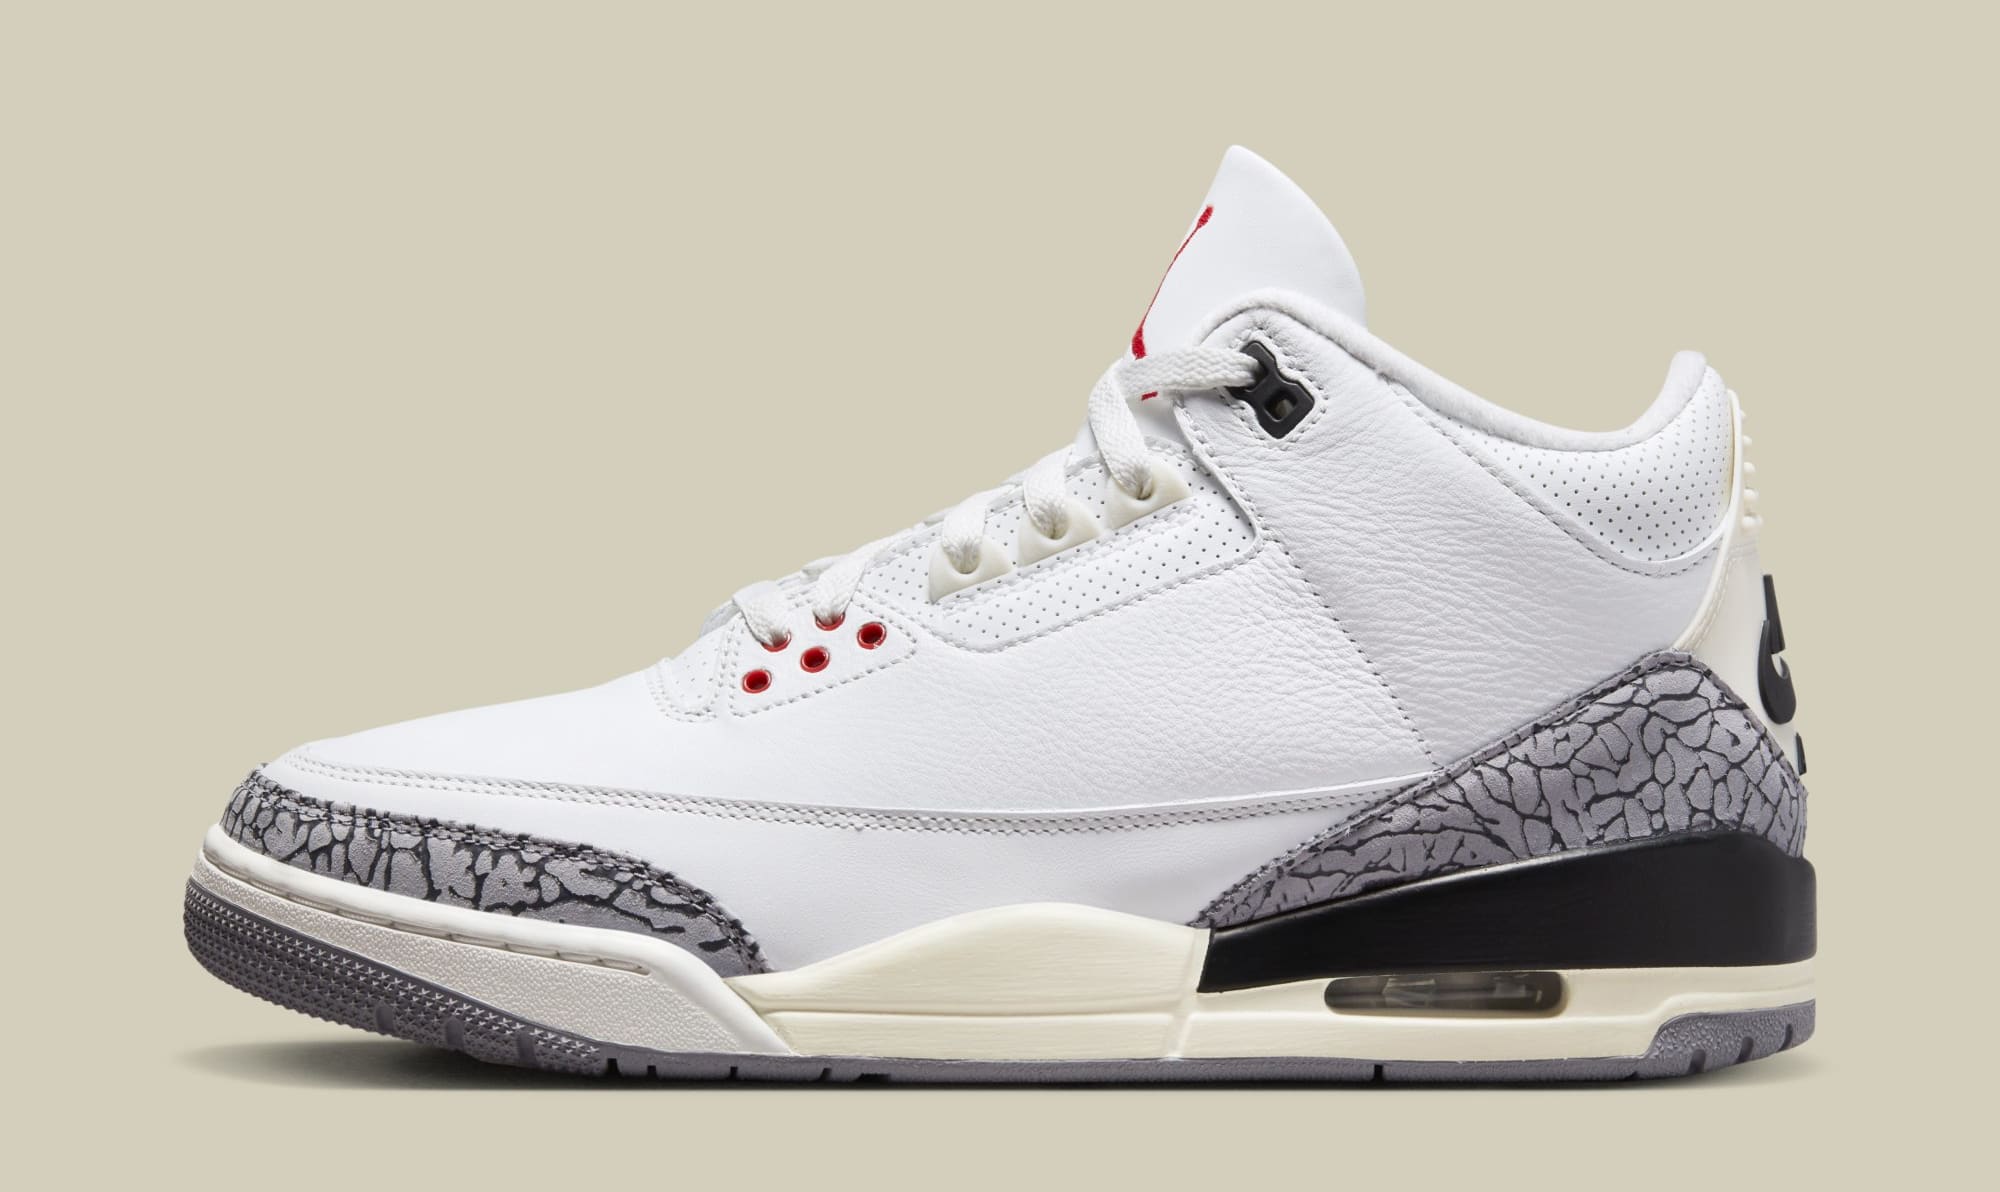 Official Look at the 2023 'White Cement' Air Jordan 3 Releasing this